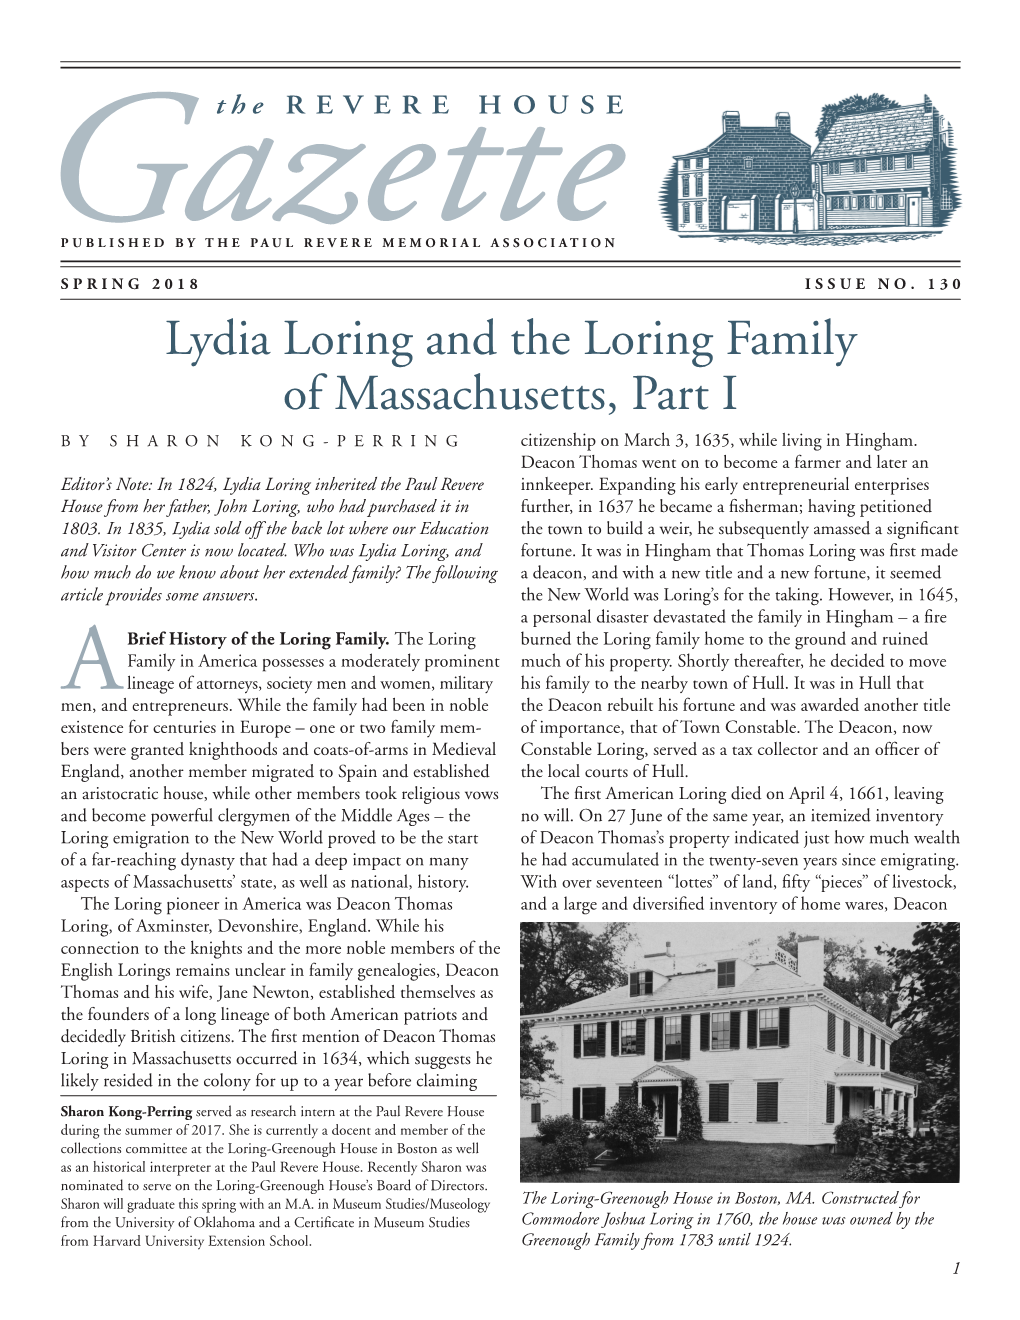 Lydia Loring and the Loring Family of Massachusetts, Part I by SHARON KONG-PERRING Citizenship on March 3, 1635, While Living in Hingham